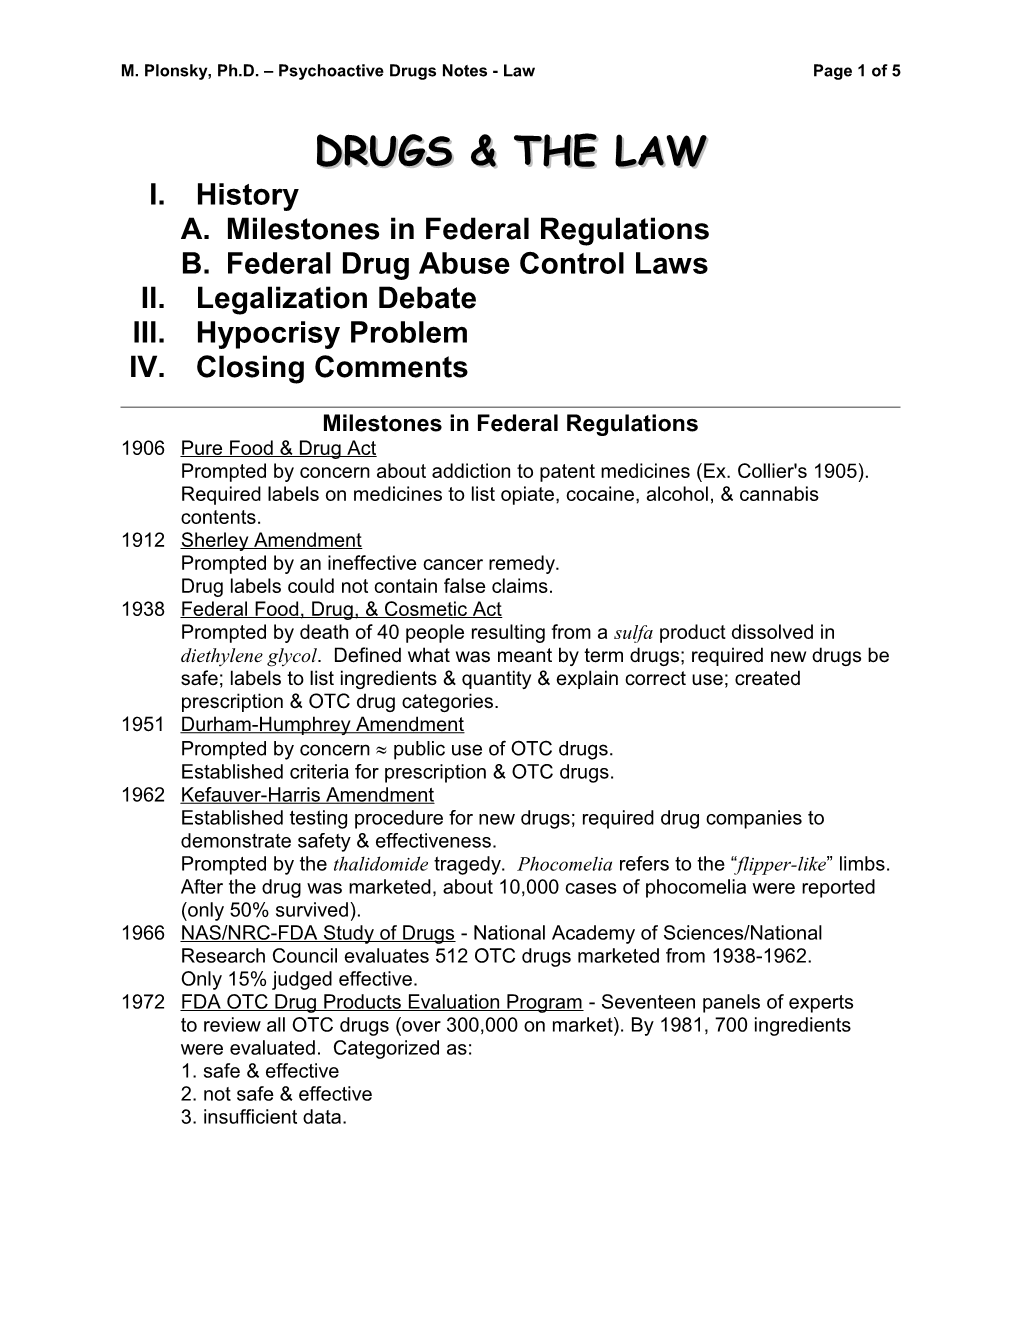 M. Plonsky, Ph.D. Psychoactive Drugs Notes - Lawpage 1 of 4